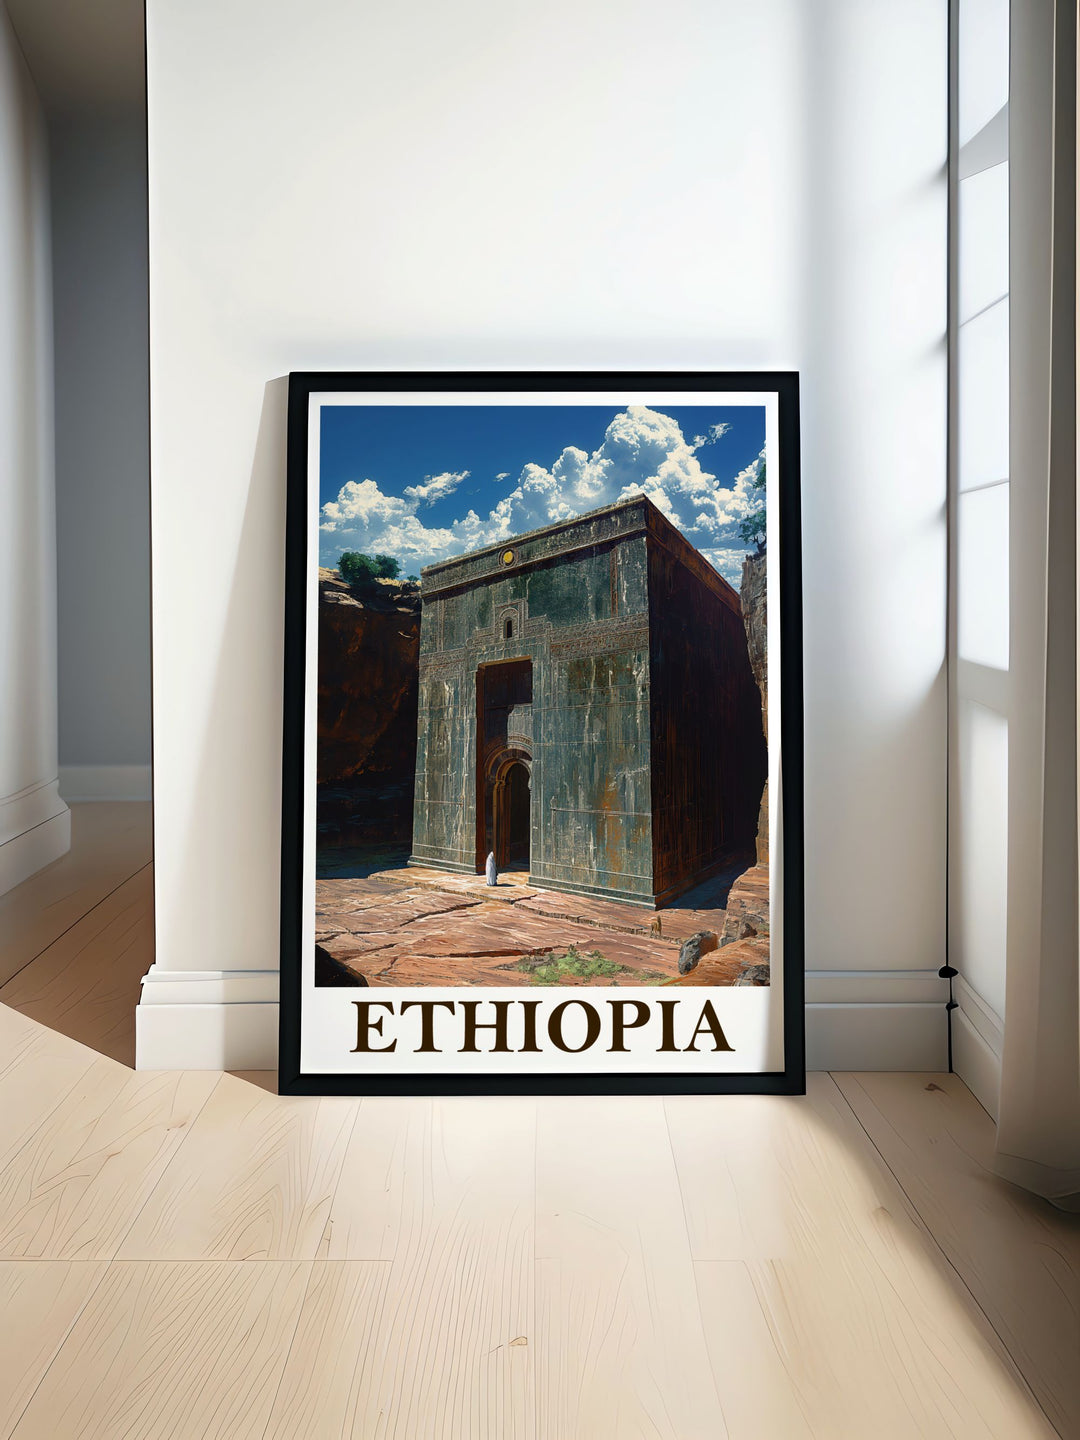 Ethiopia Print featuring the majestic Lalibela Rock Hewn Churches showcasing their intricate carvings and architectural beauty perfect for adding a touch of Ethiopian heritage to your home decor or as a unique gift for history and art lovers